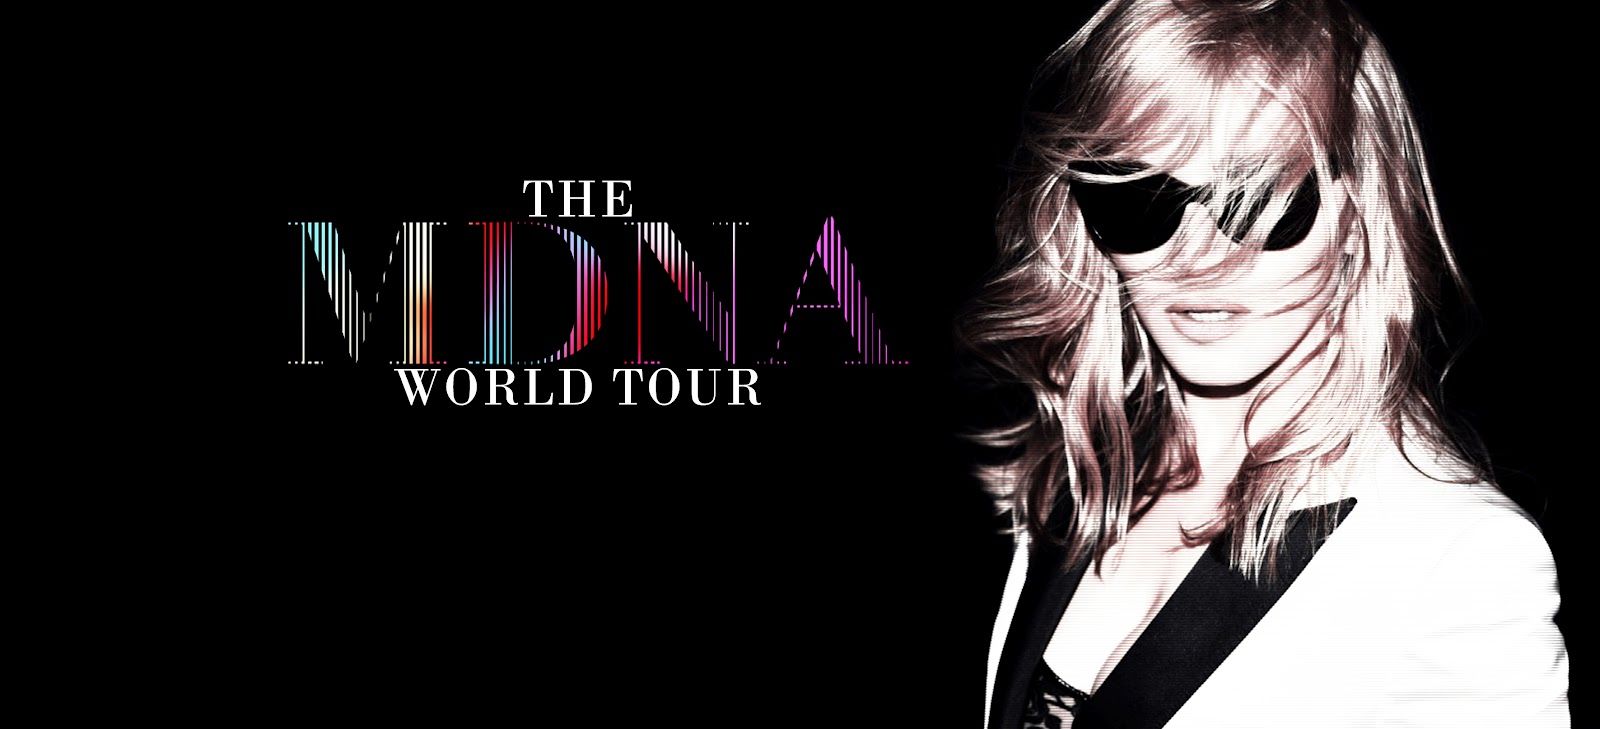 Madonna Fanmade Covers The Mdna Tour Wallpaper And Action